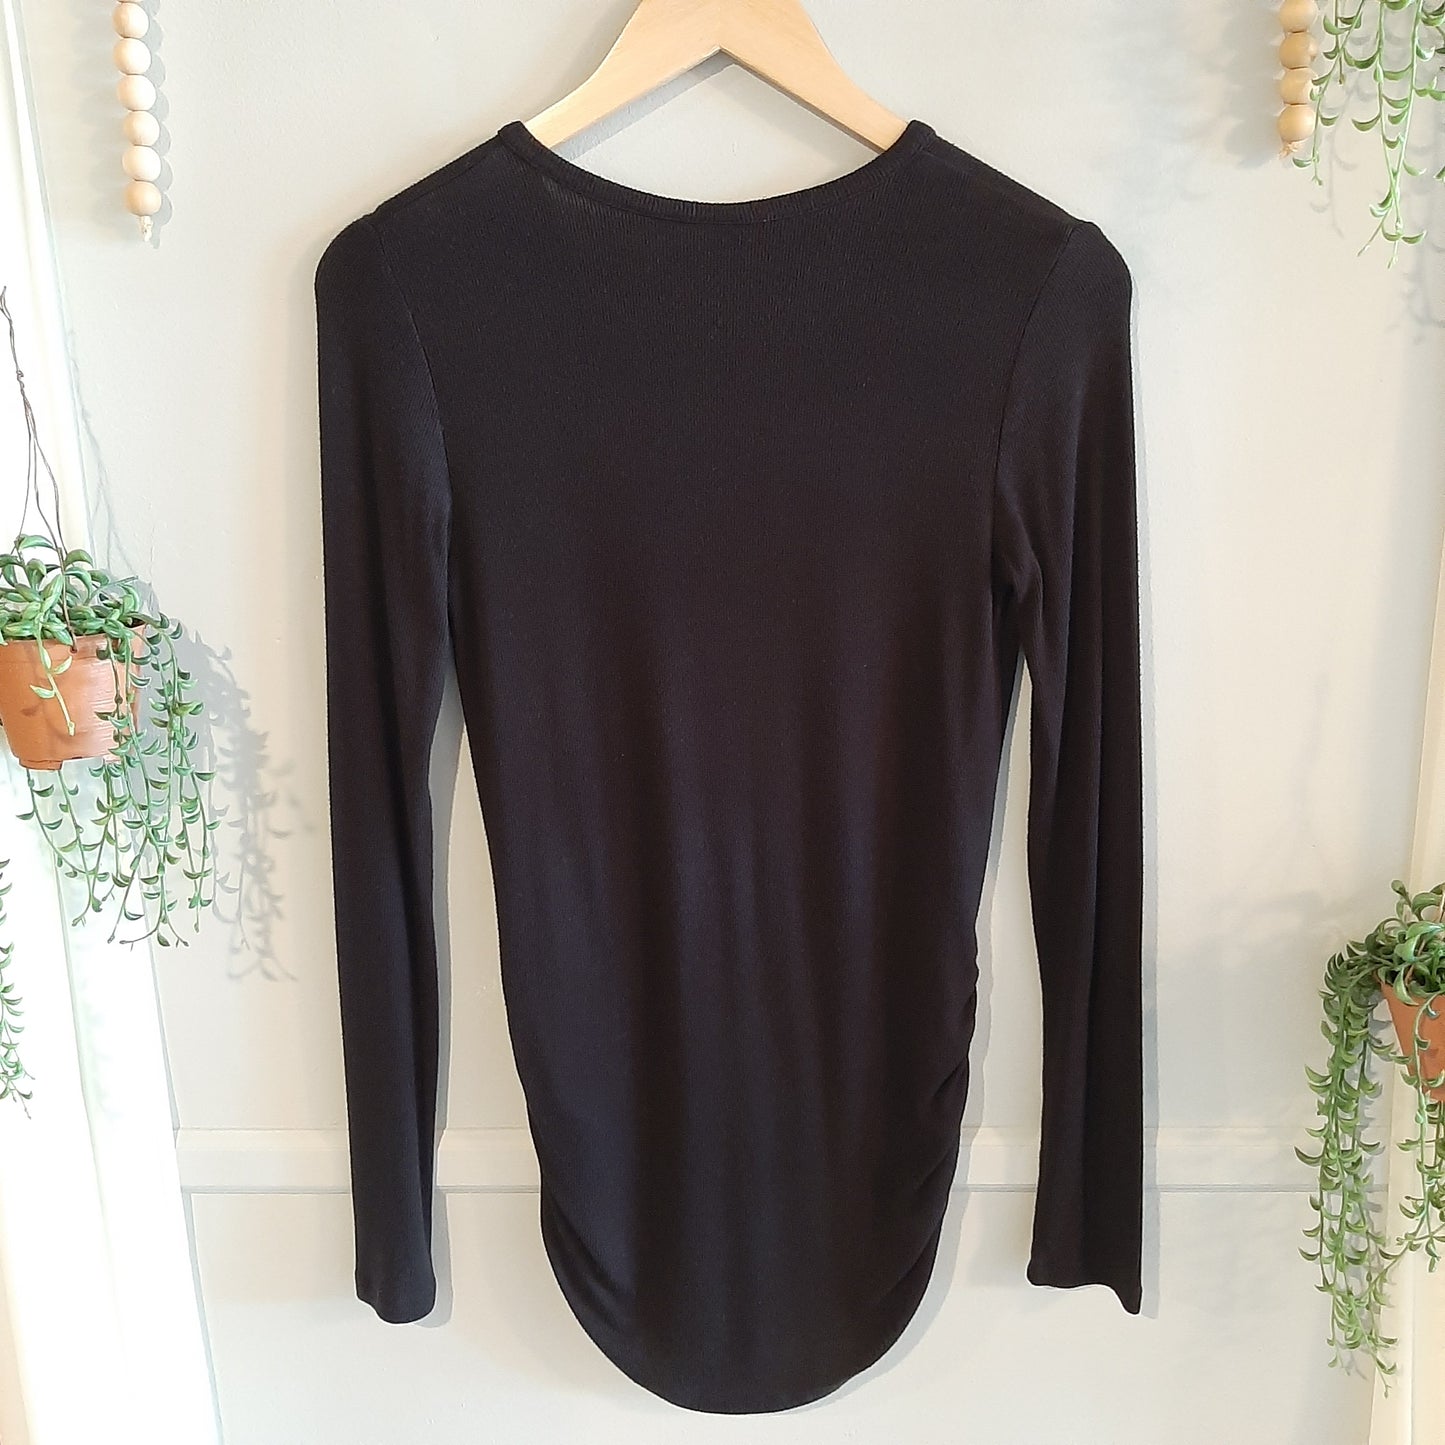 Essential ribbed knit Henley LS top, Black